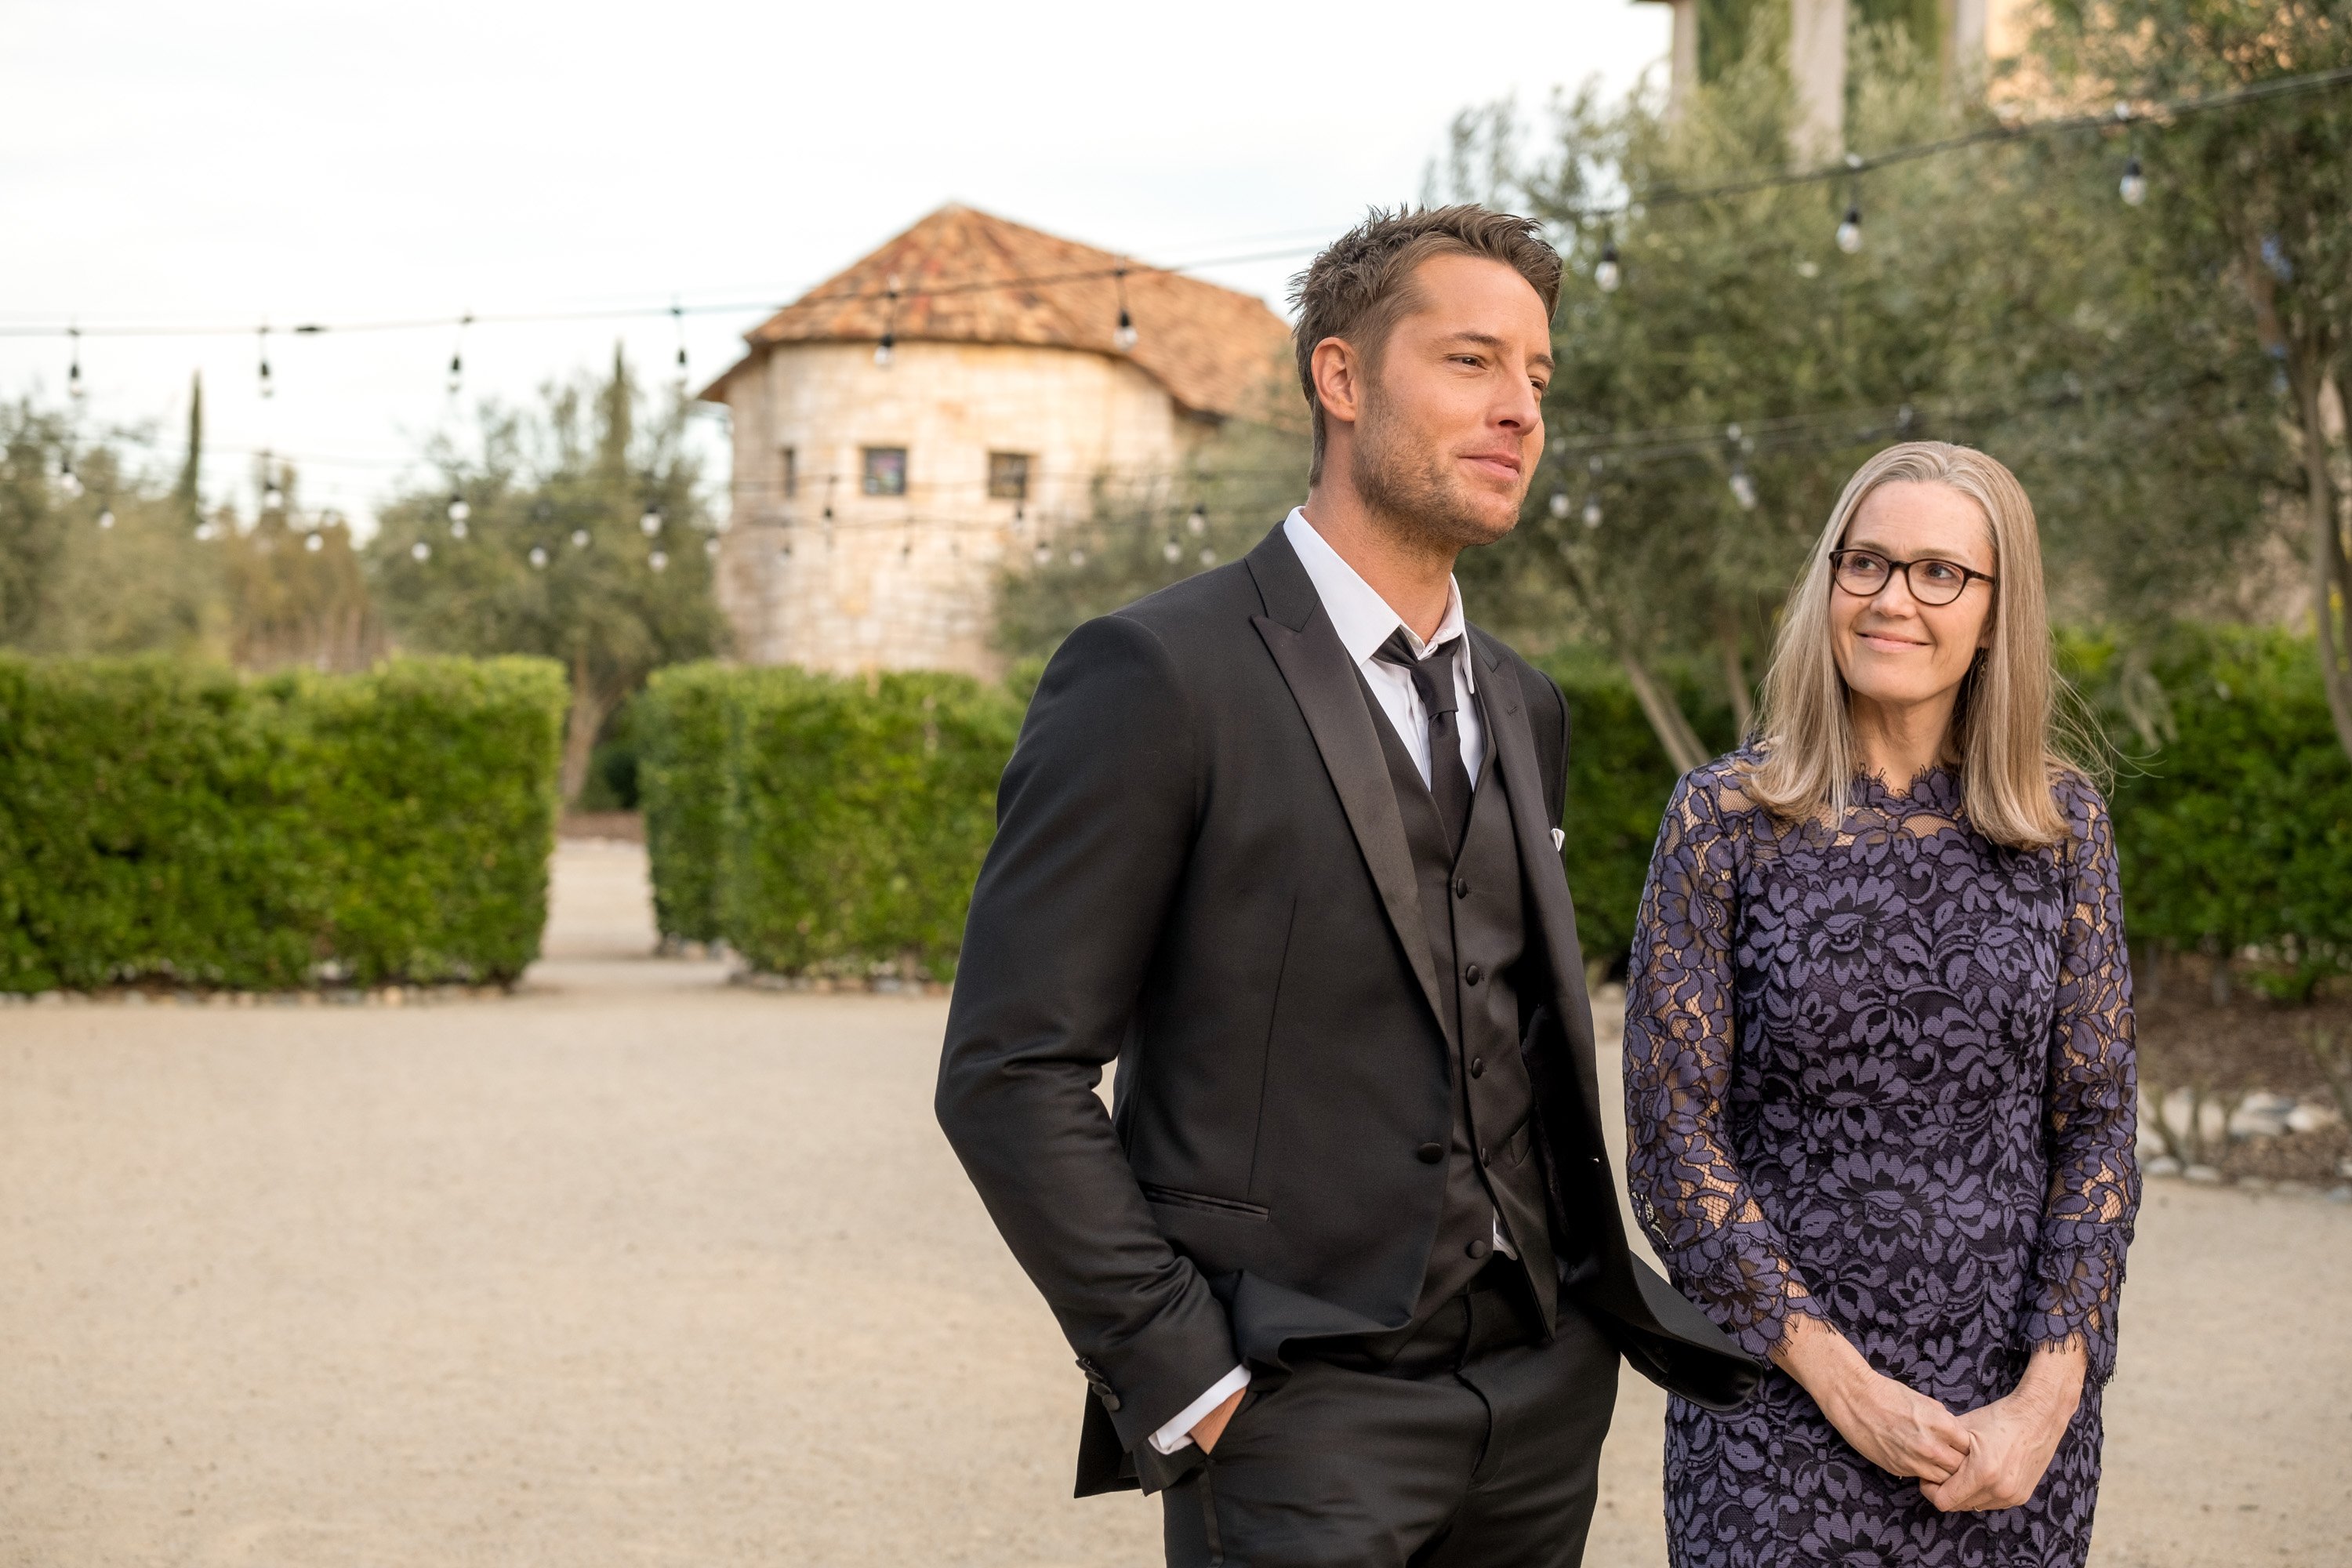 Justin Hartley and Mandy Moore, in character as Kevin and Rebecca in 'This Is Us' Season 6 Episode 13, share a scene. Kevin wears a black suit. Rebecca wears a dark blue long-sleeved lacy floral dress.